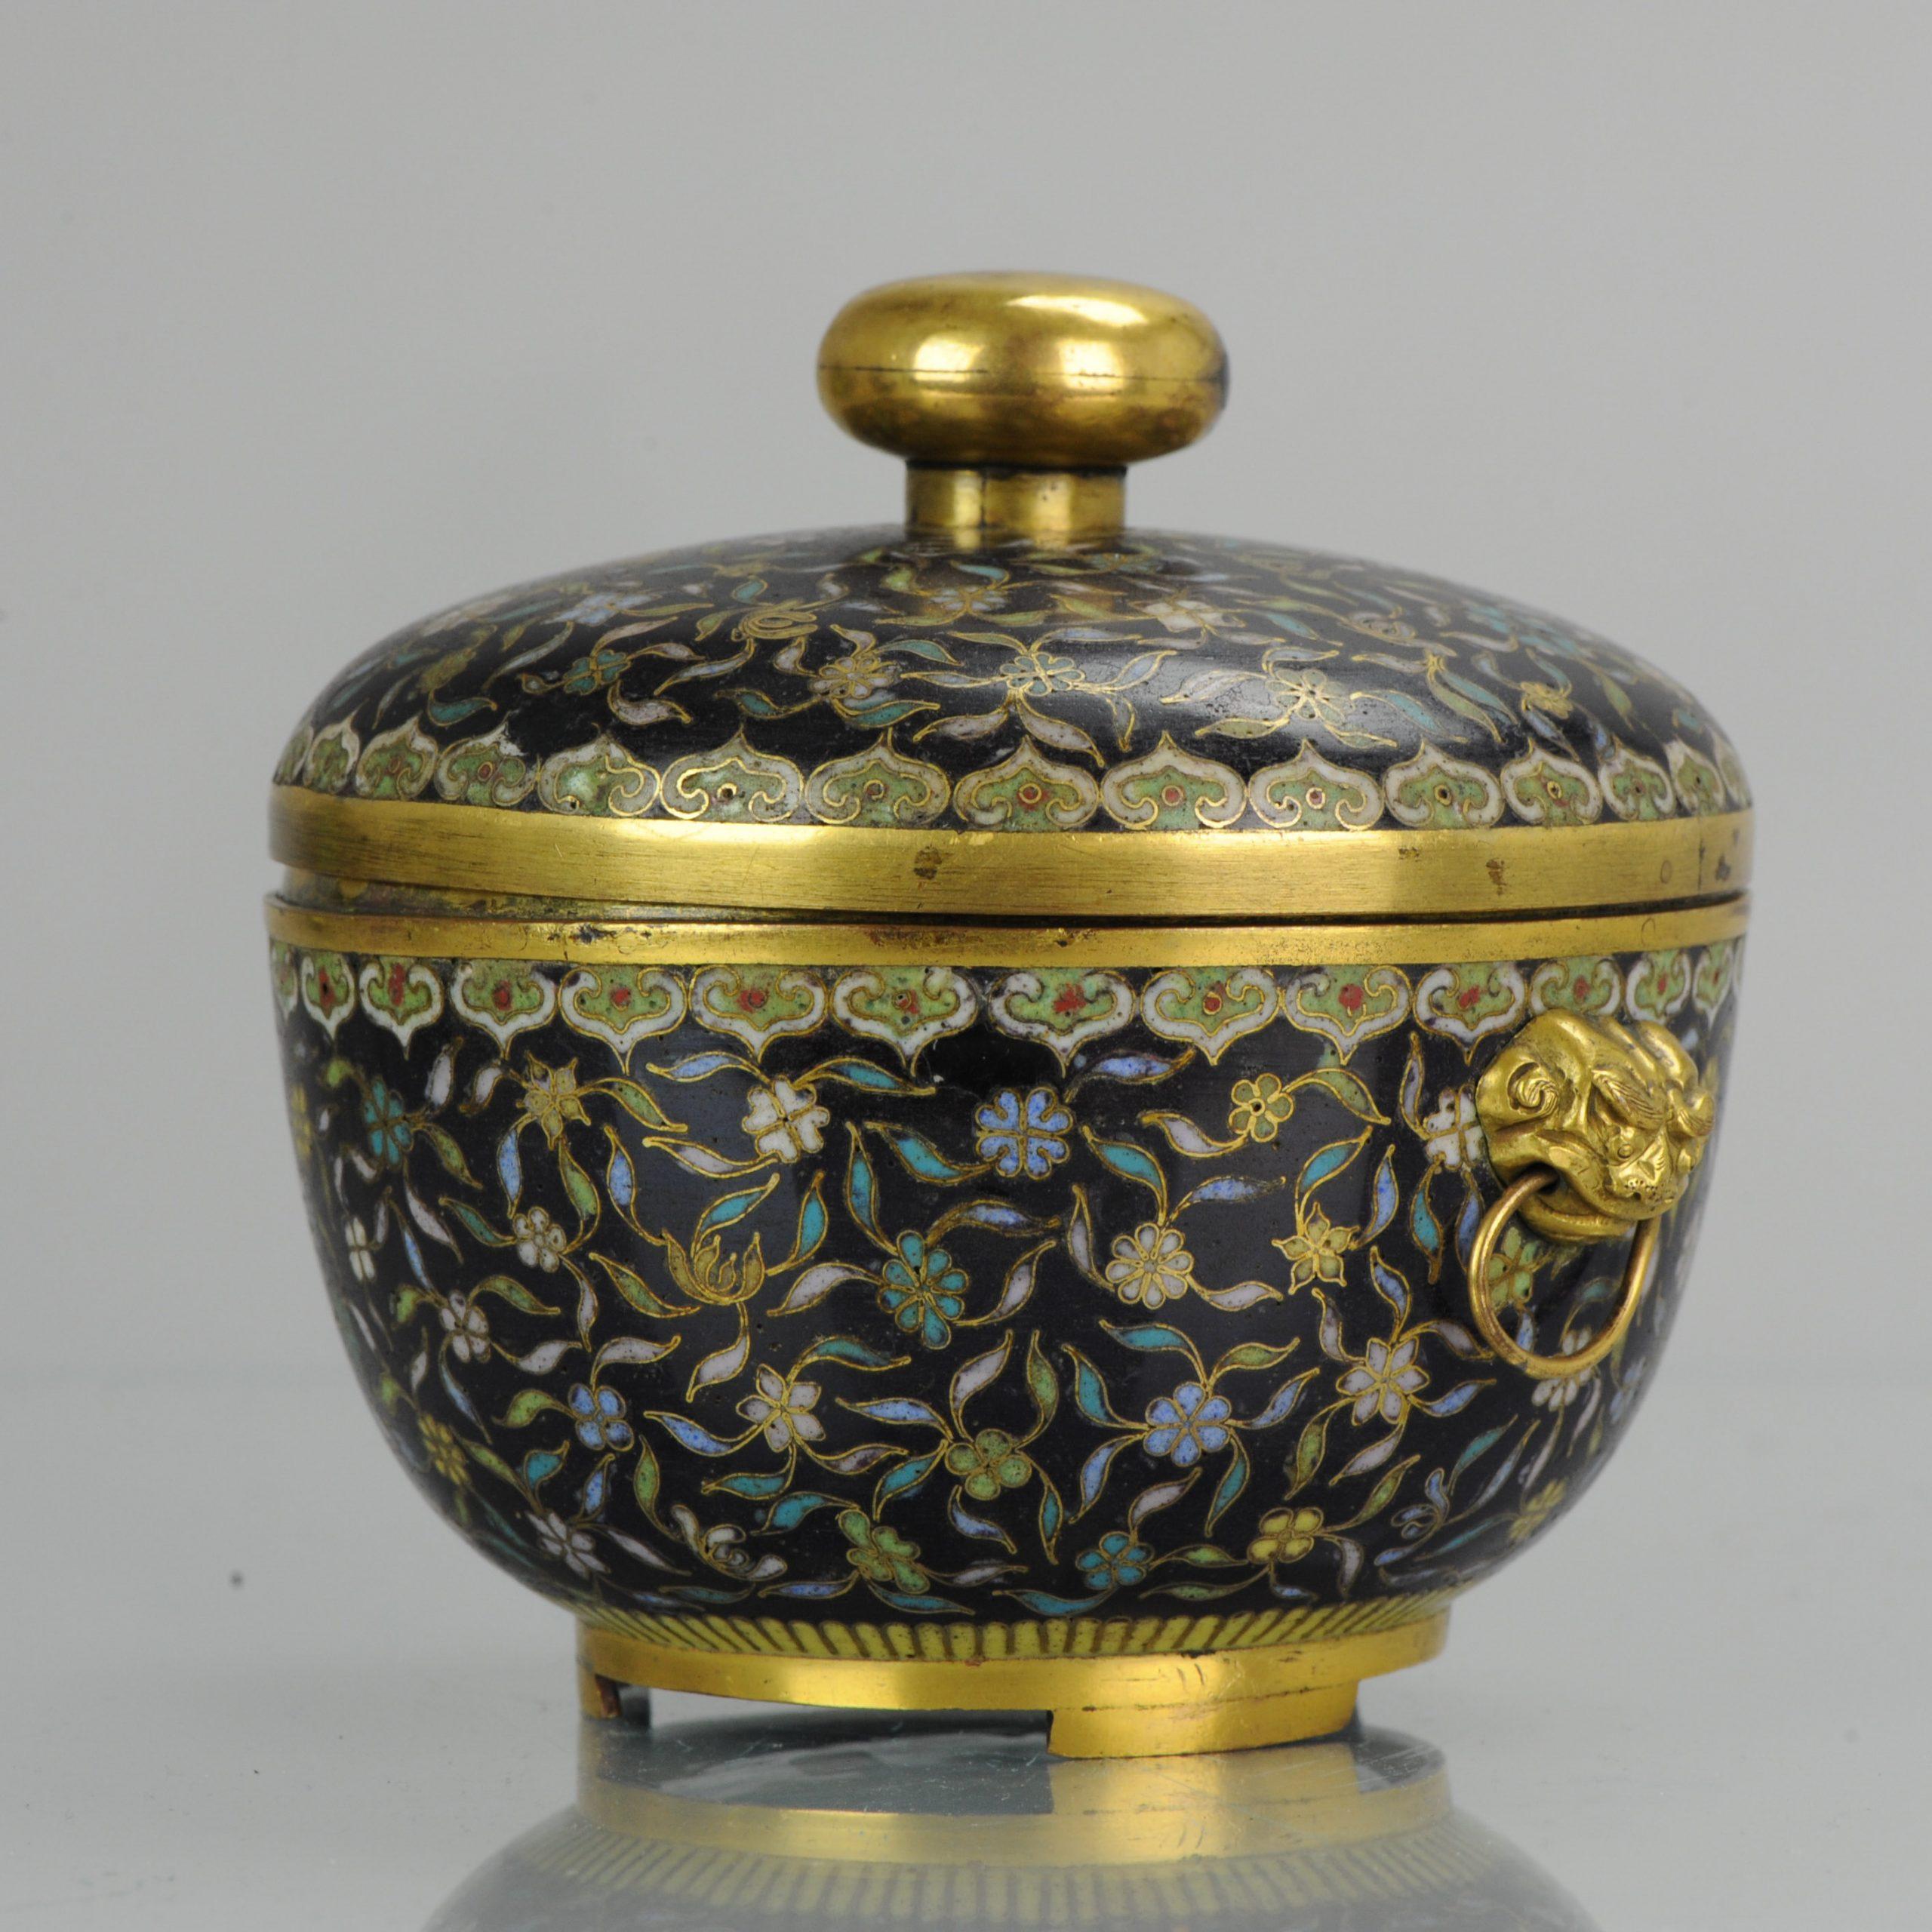 Antique Chinese Bronze Cloisonné Lidded Kamcheng SE Asia market B In Good Condition For Sale In Amsterdam, Noord Holland